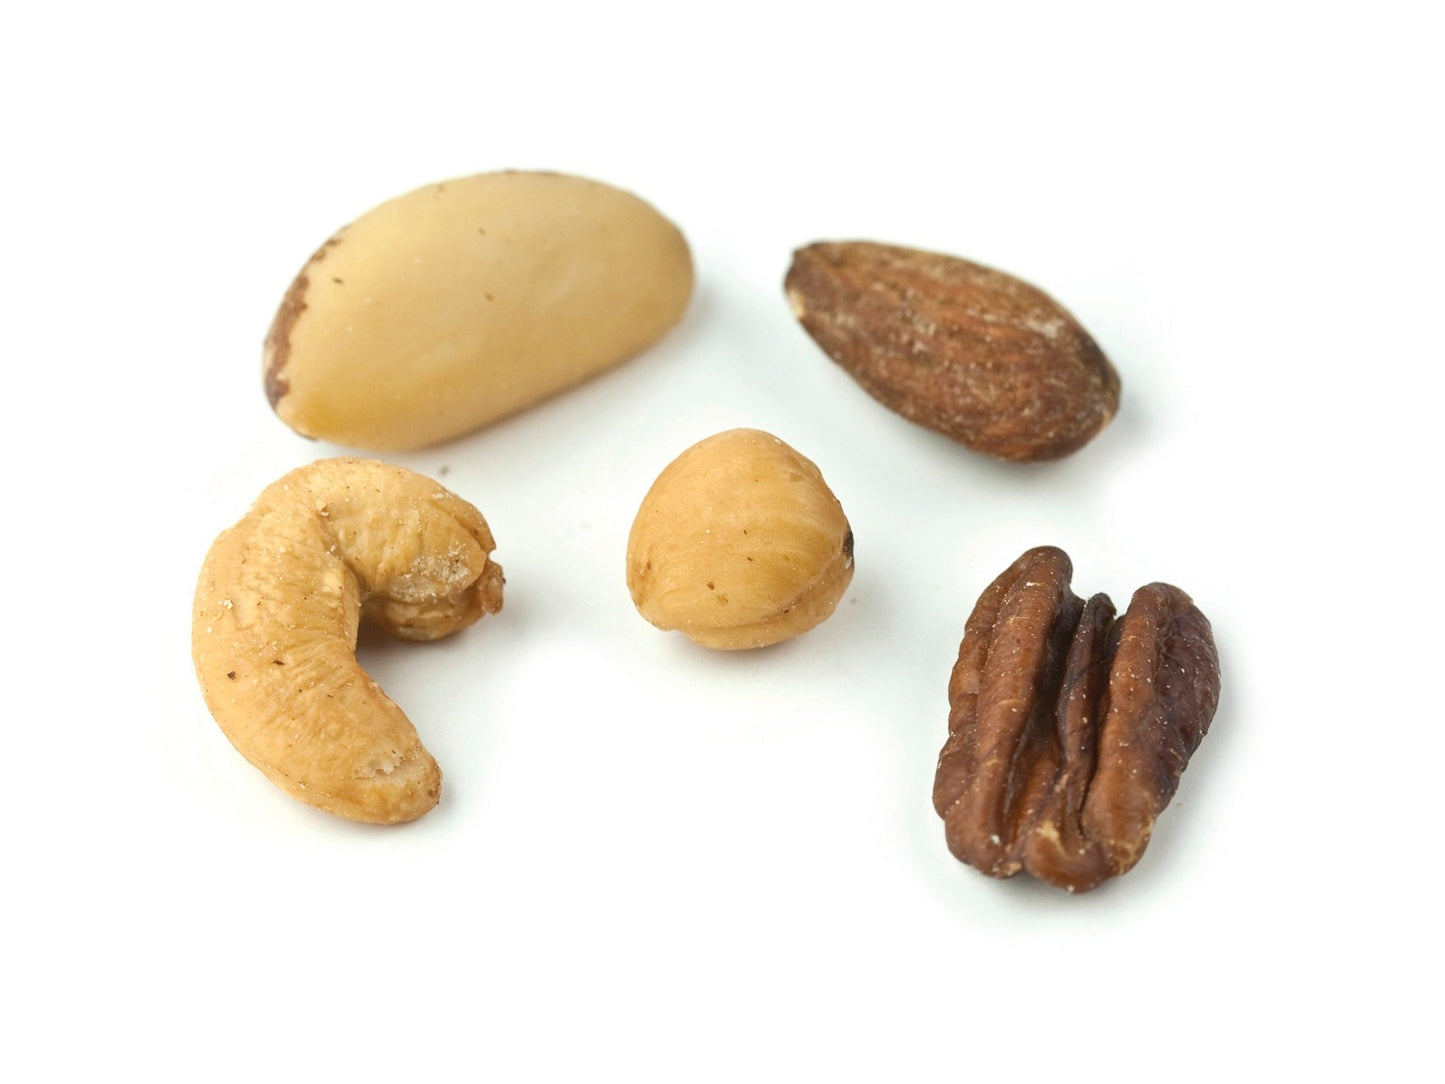 Roasted Unsalted Mixed Nuts